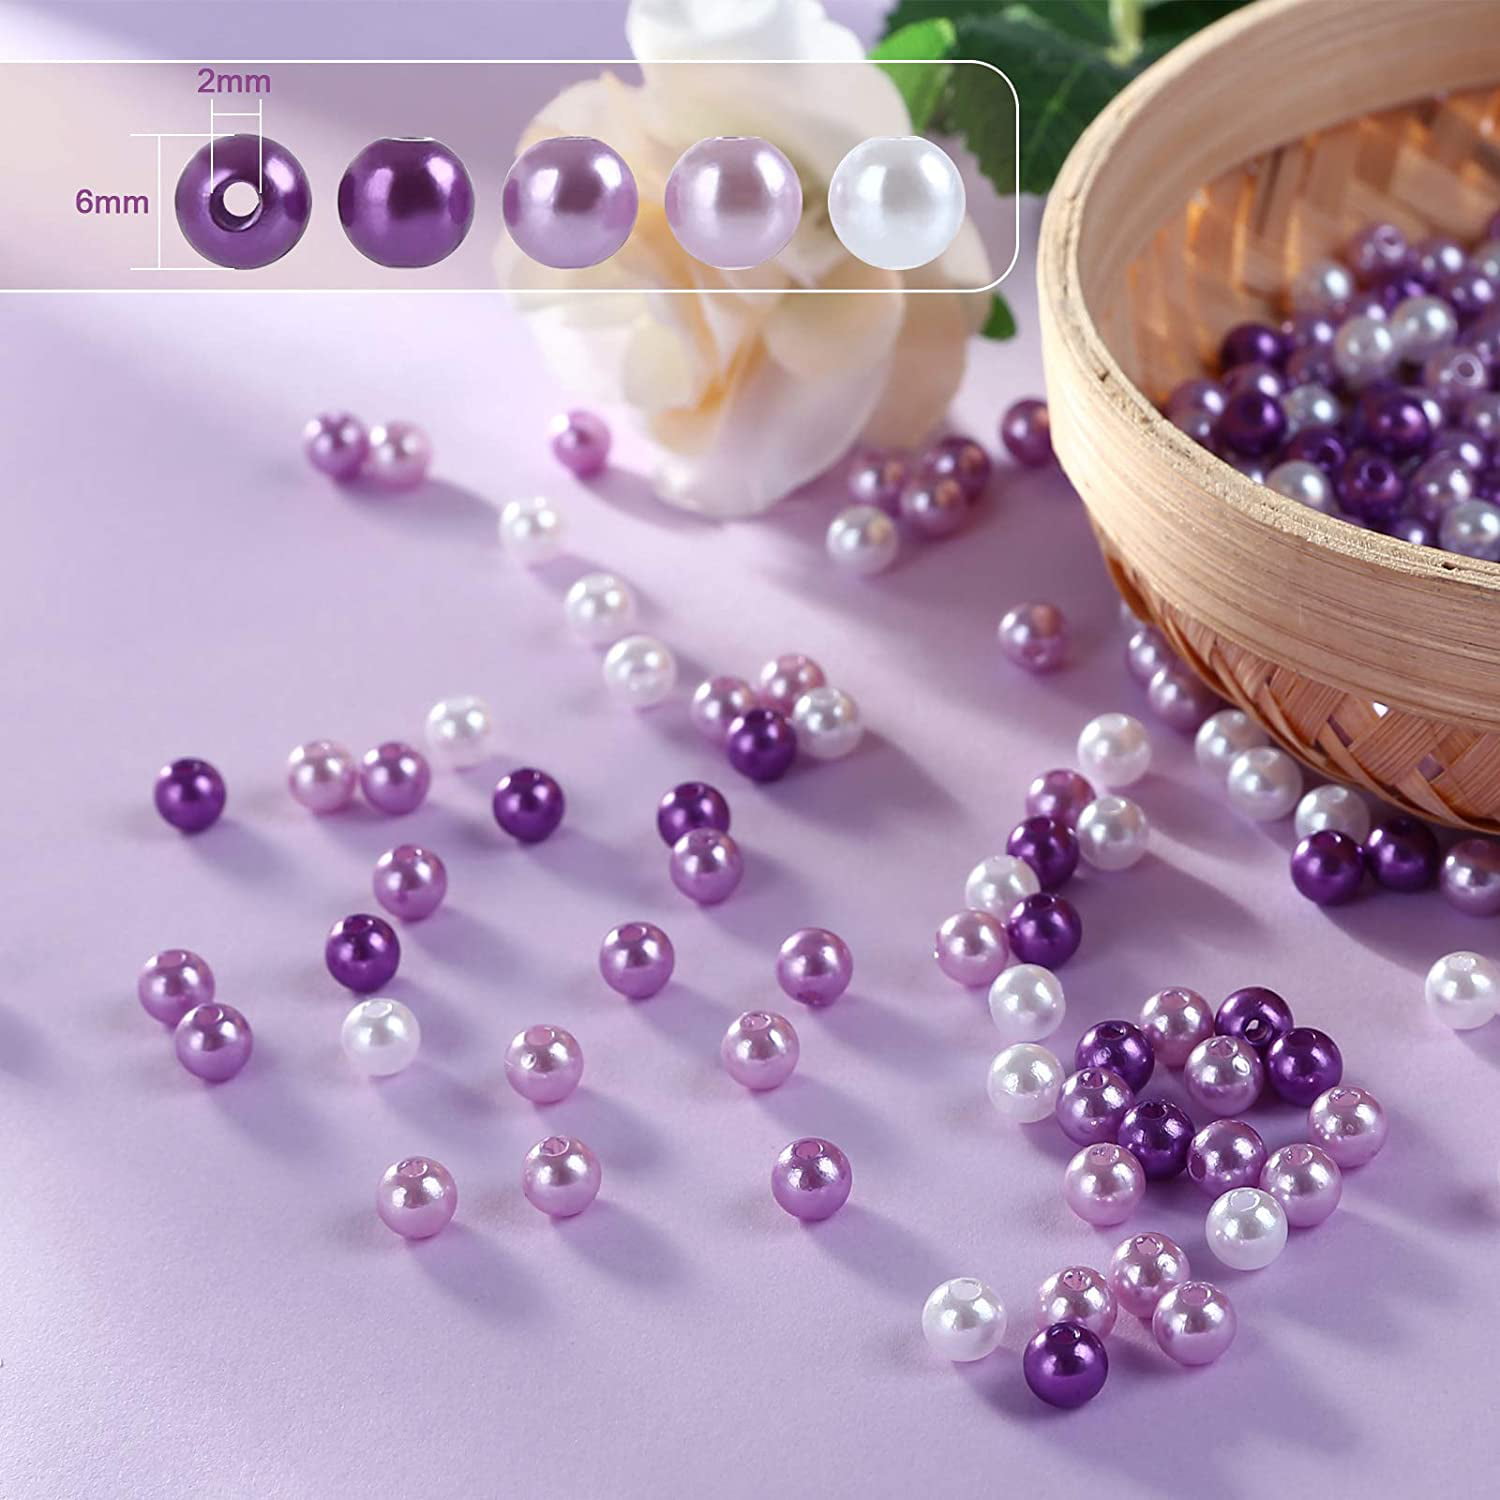 Naler 500pcs Art Pearls, Size 6mm Pearl Beads Charms for Art Craft Decorations Jewellery Making DIY, 4 Colors (Purple Series)